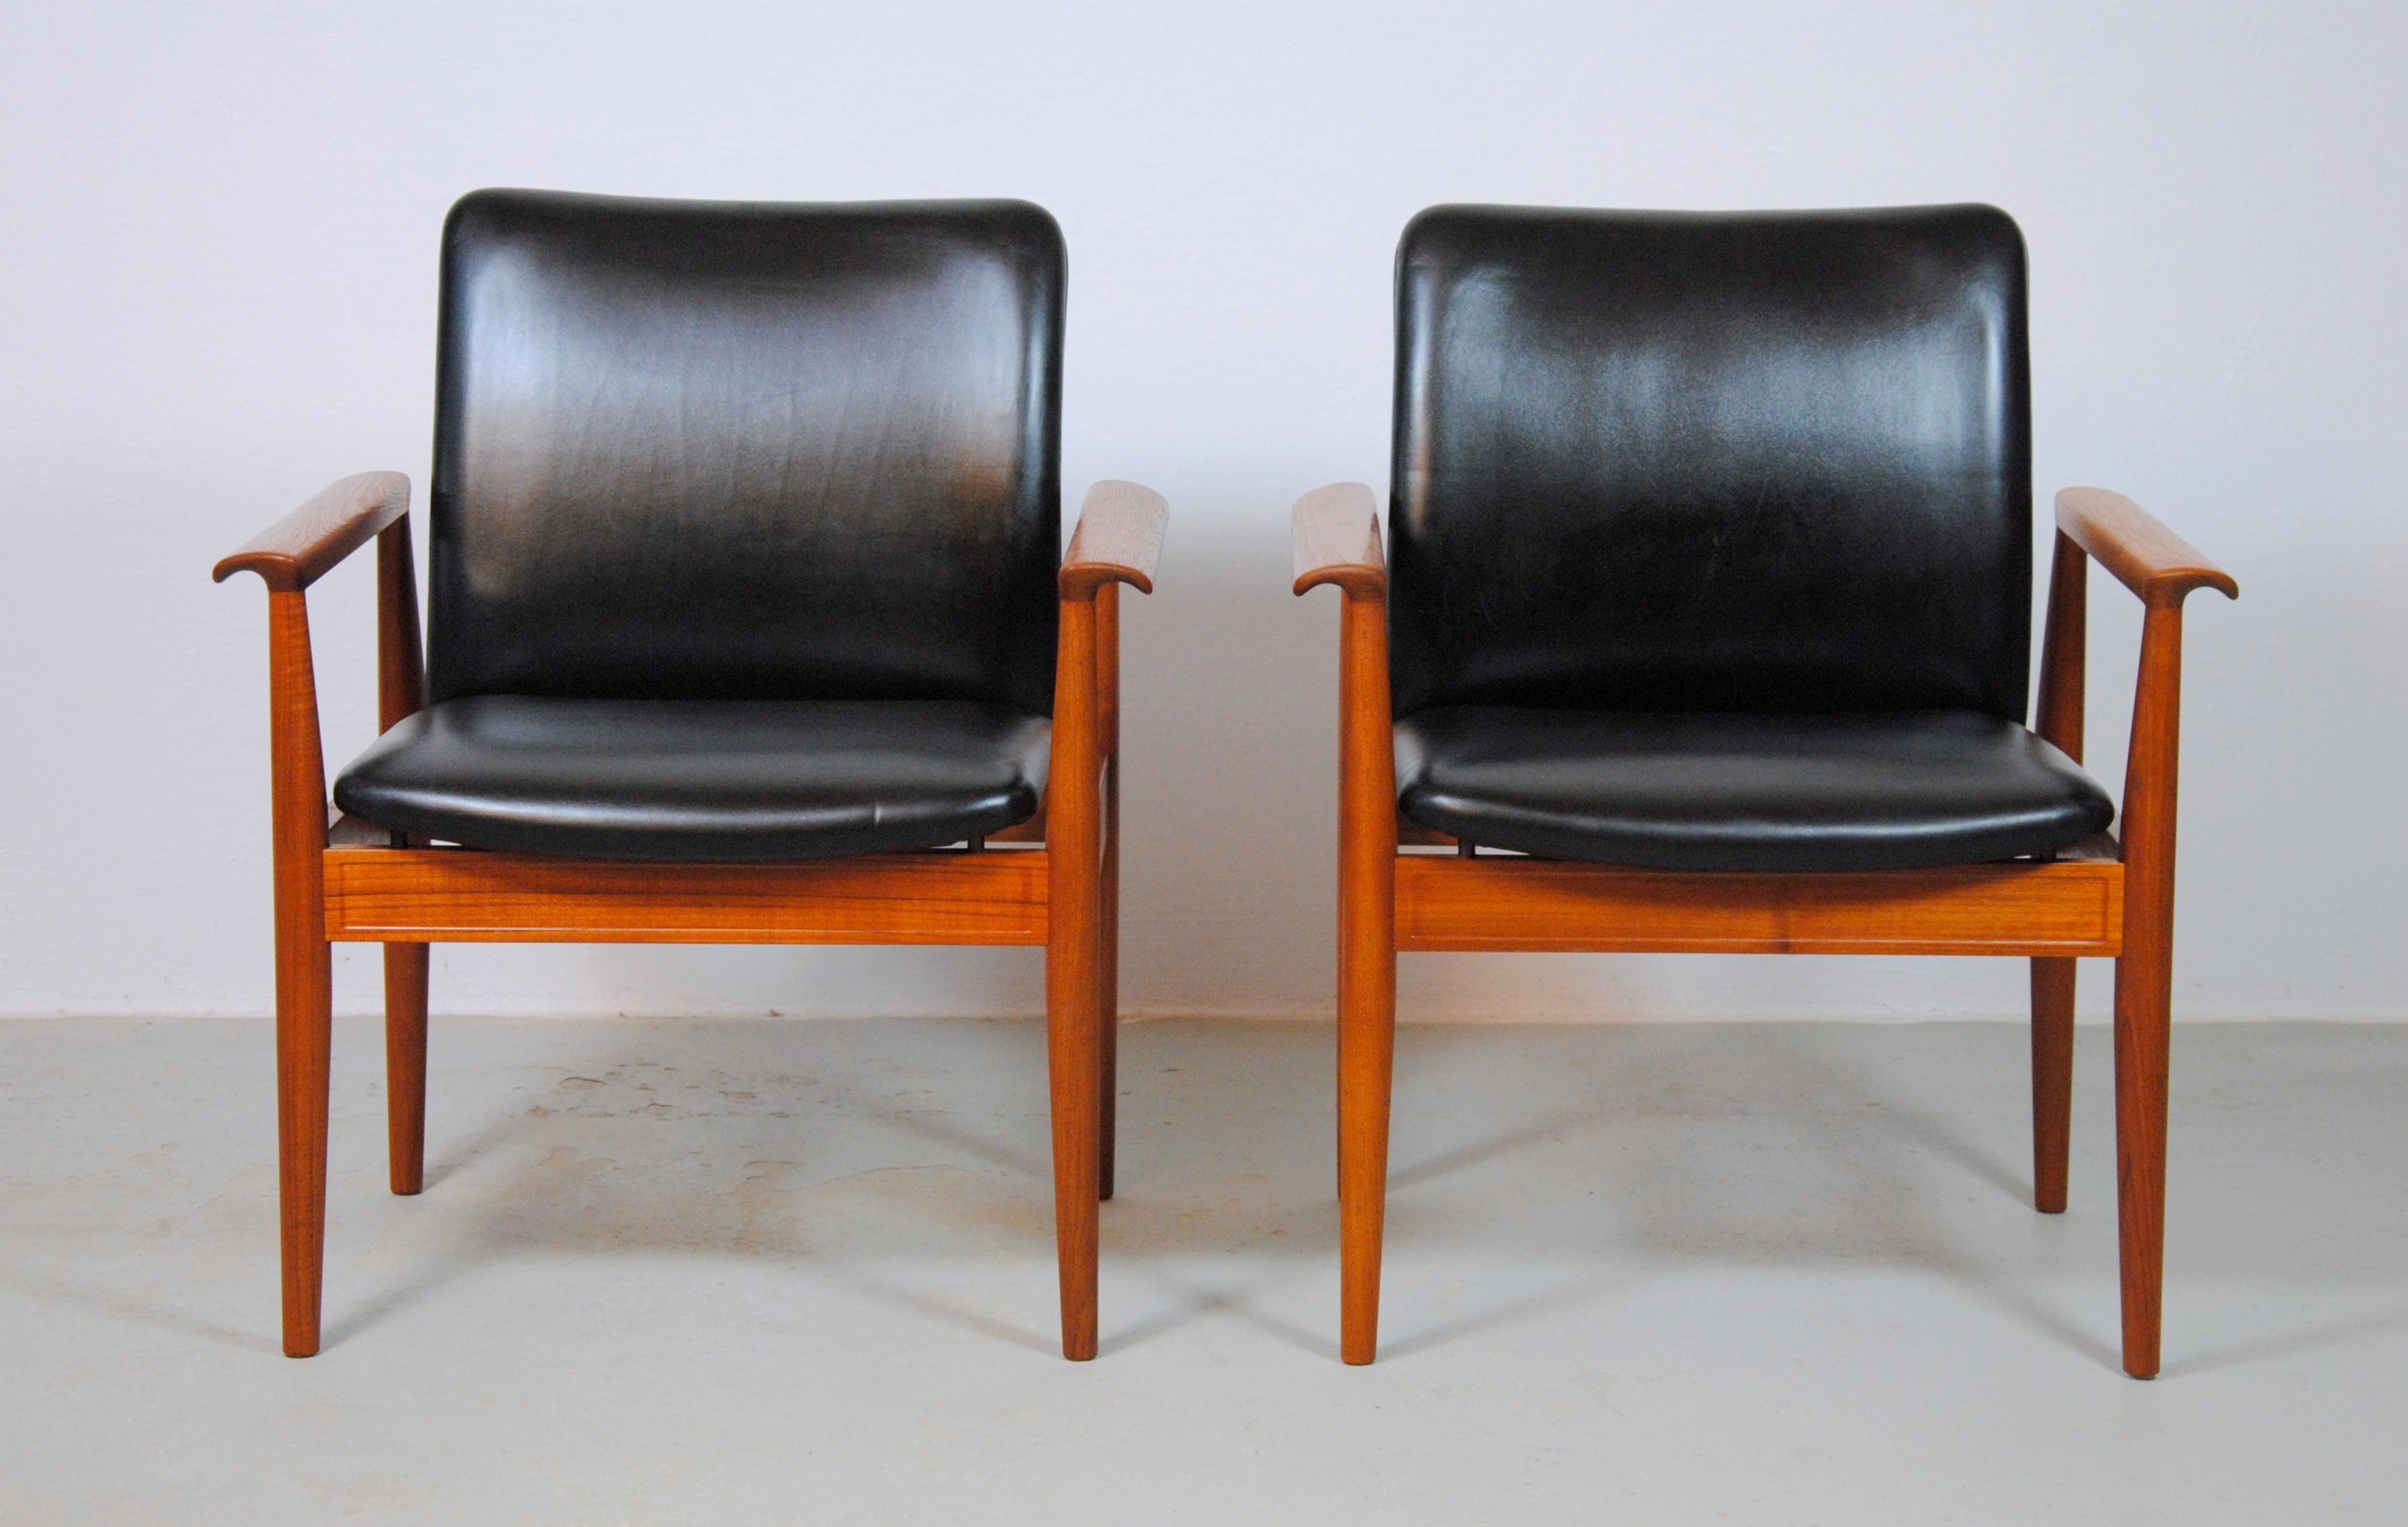 Set of two Finn Juhl armchairs in Bangkok teak and black leather designed in 1963 and made by France and Son / Cado in the 1960s

The armchairs have a solid stabile frame in teak and comfortable seats in black leather. 

Frames of the chairs